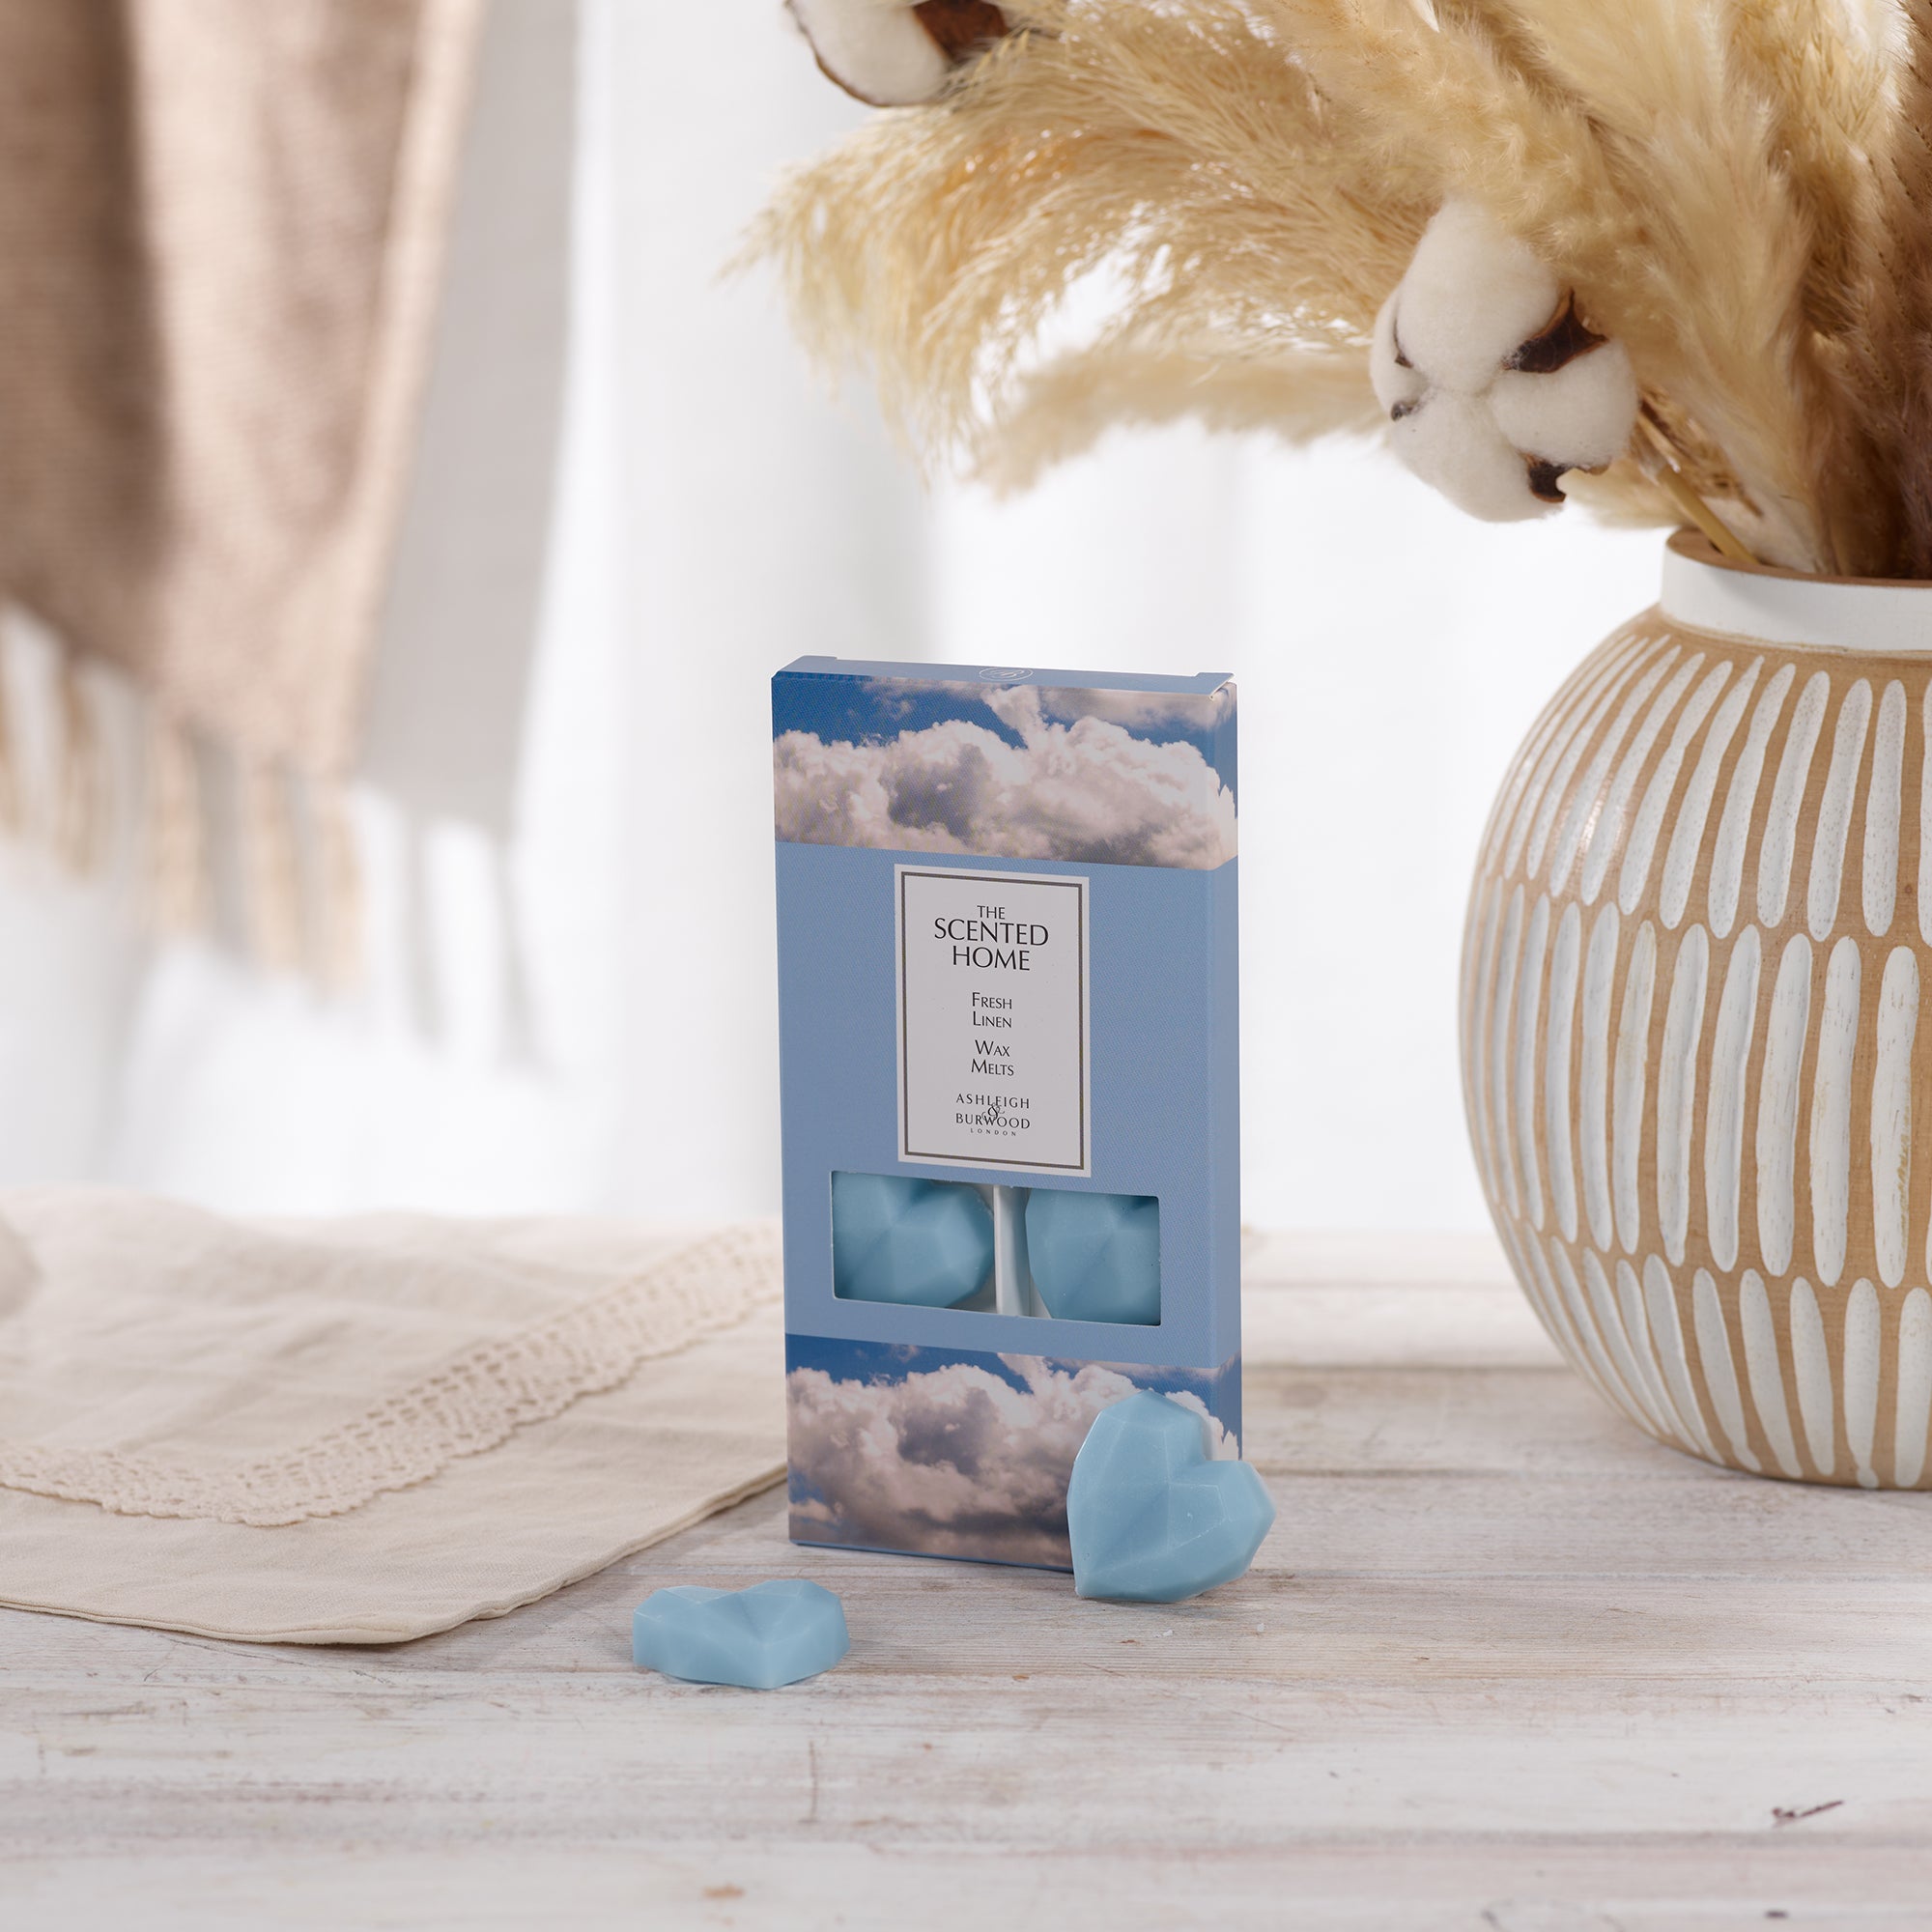 The Scented Home Fresh Linen Wax Melts